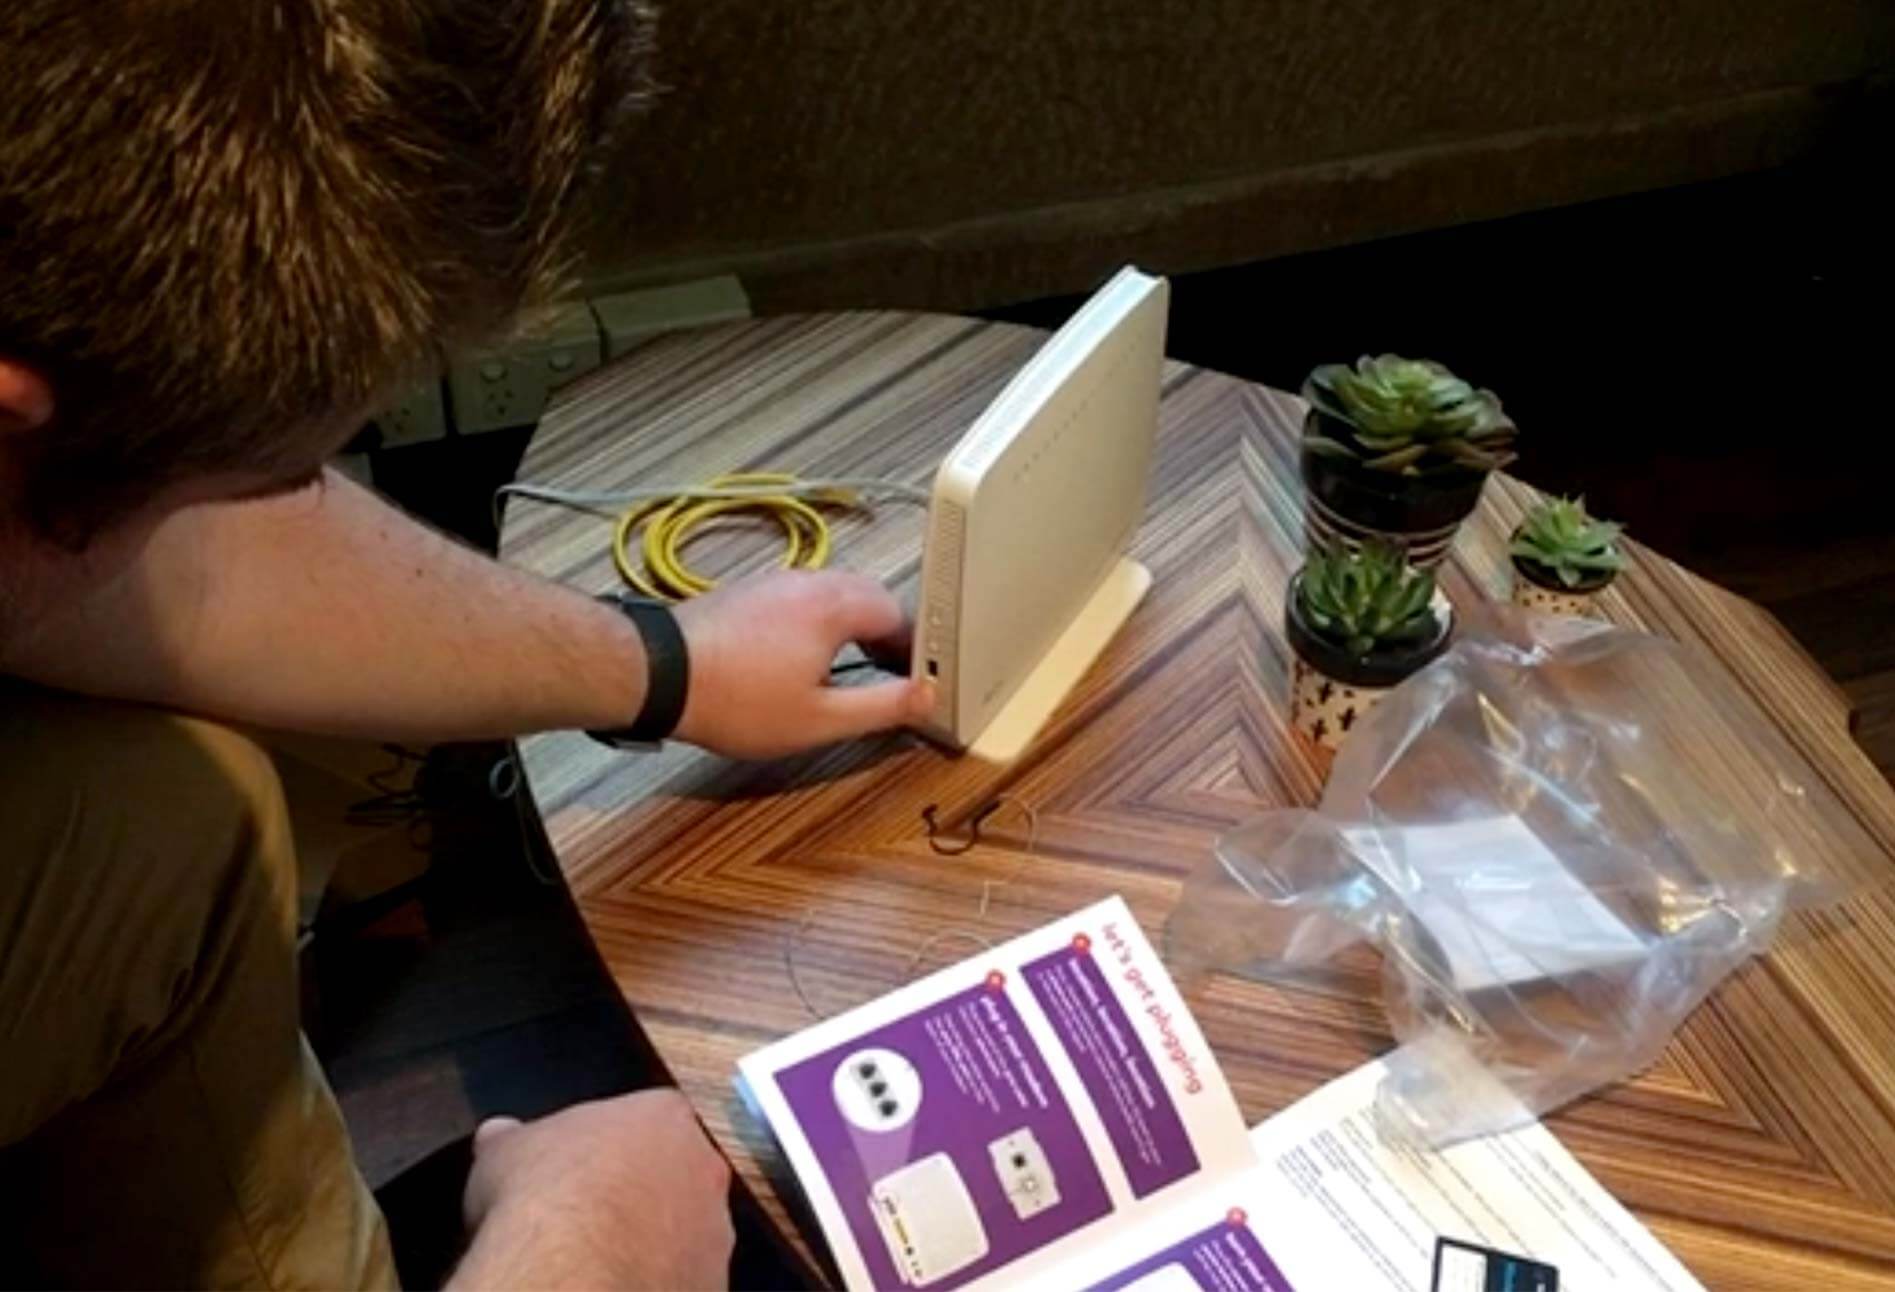 Image of a man trying to set up a modem on a table with cables on a table